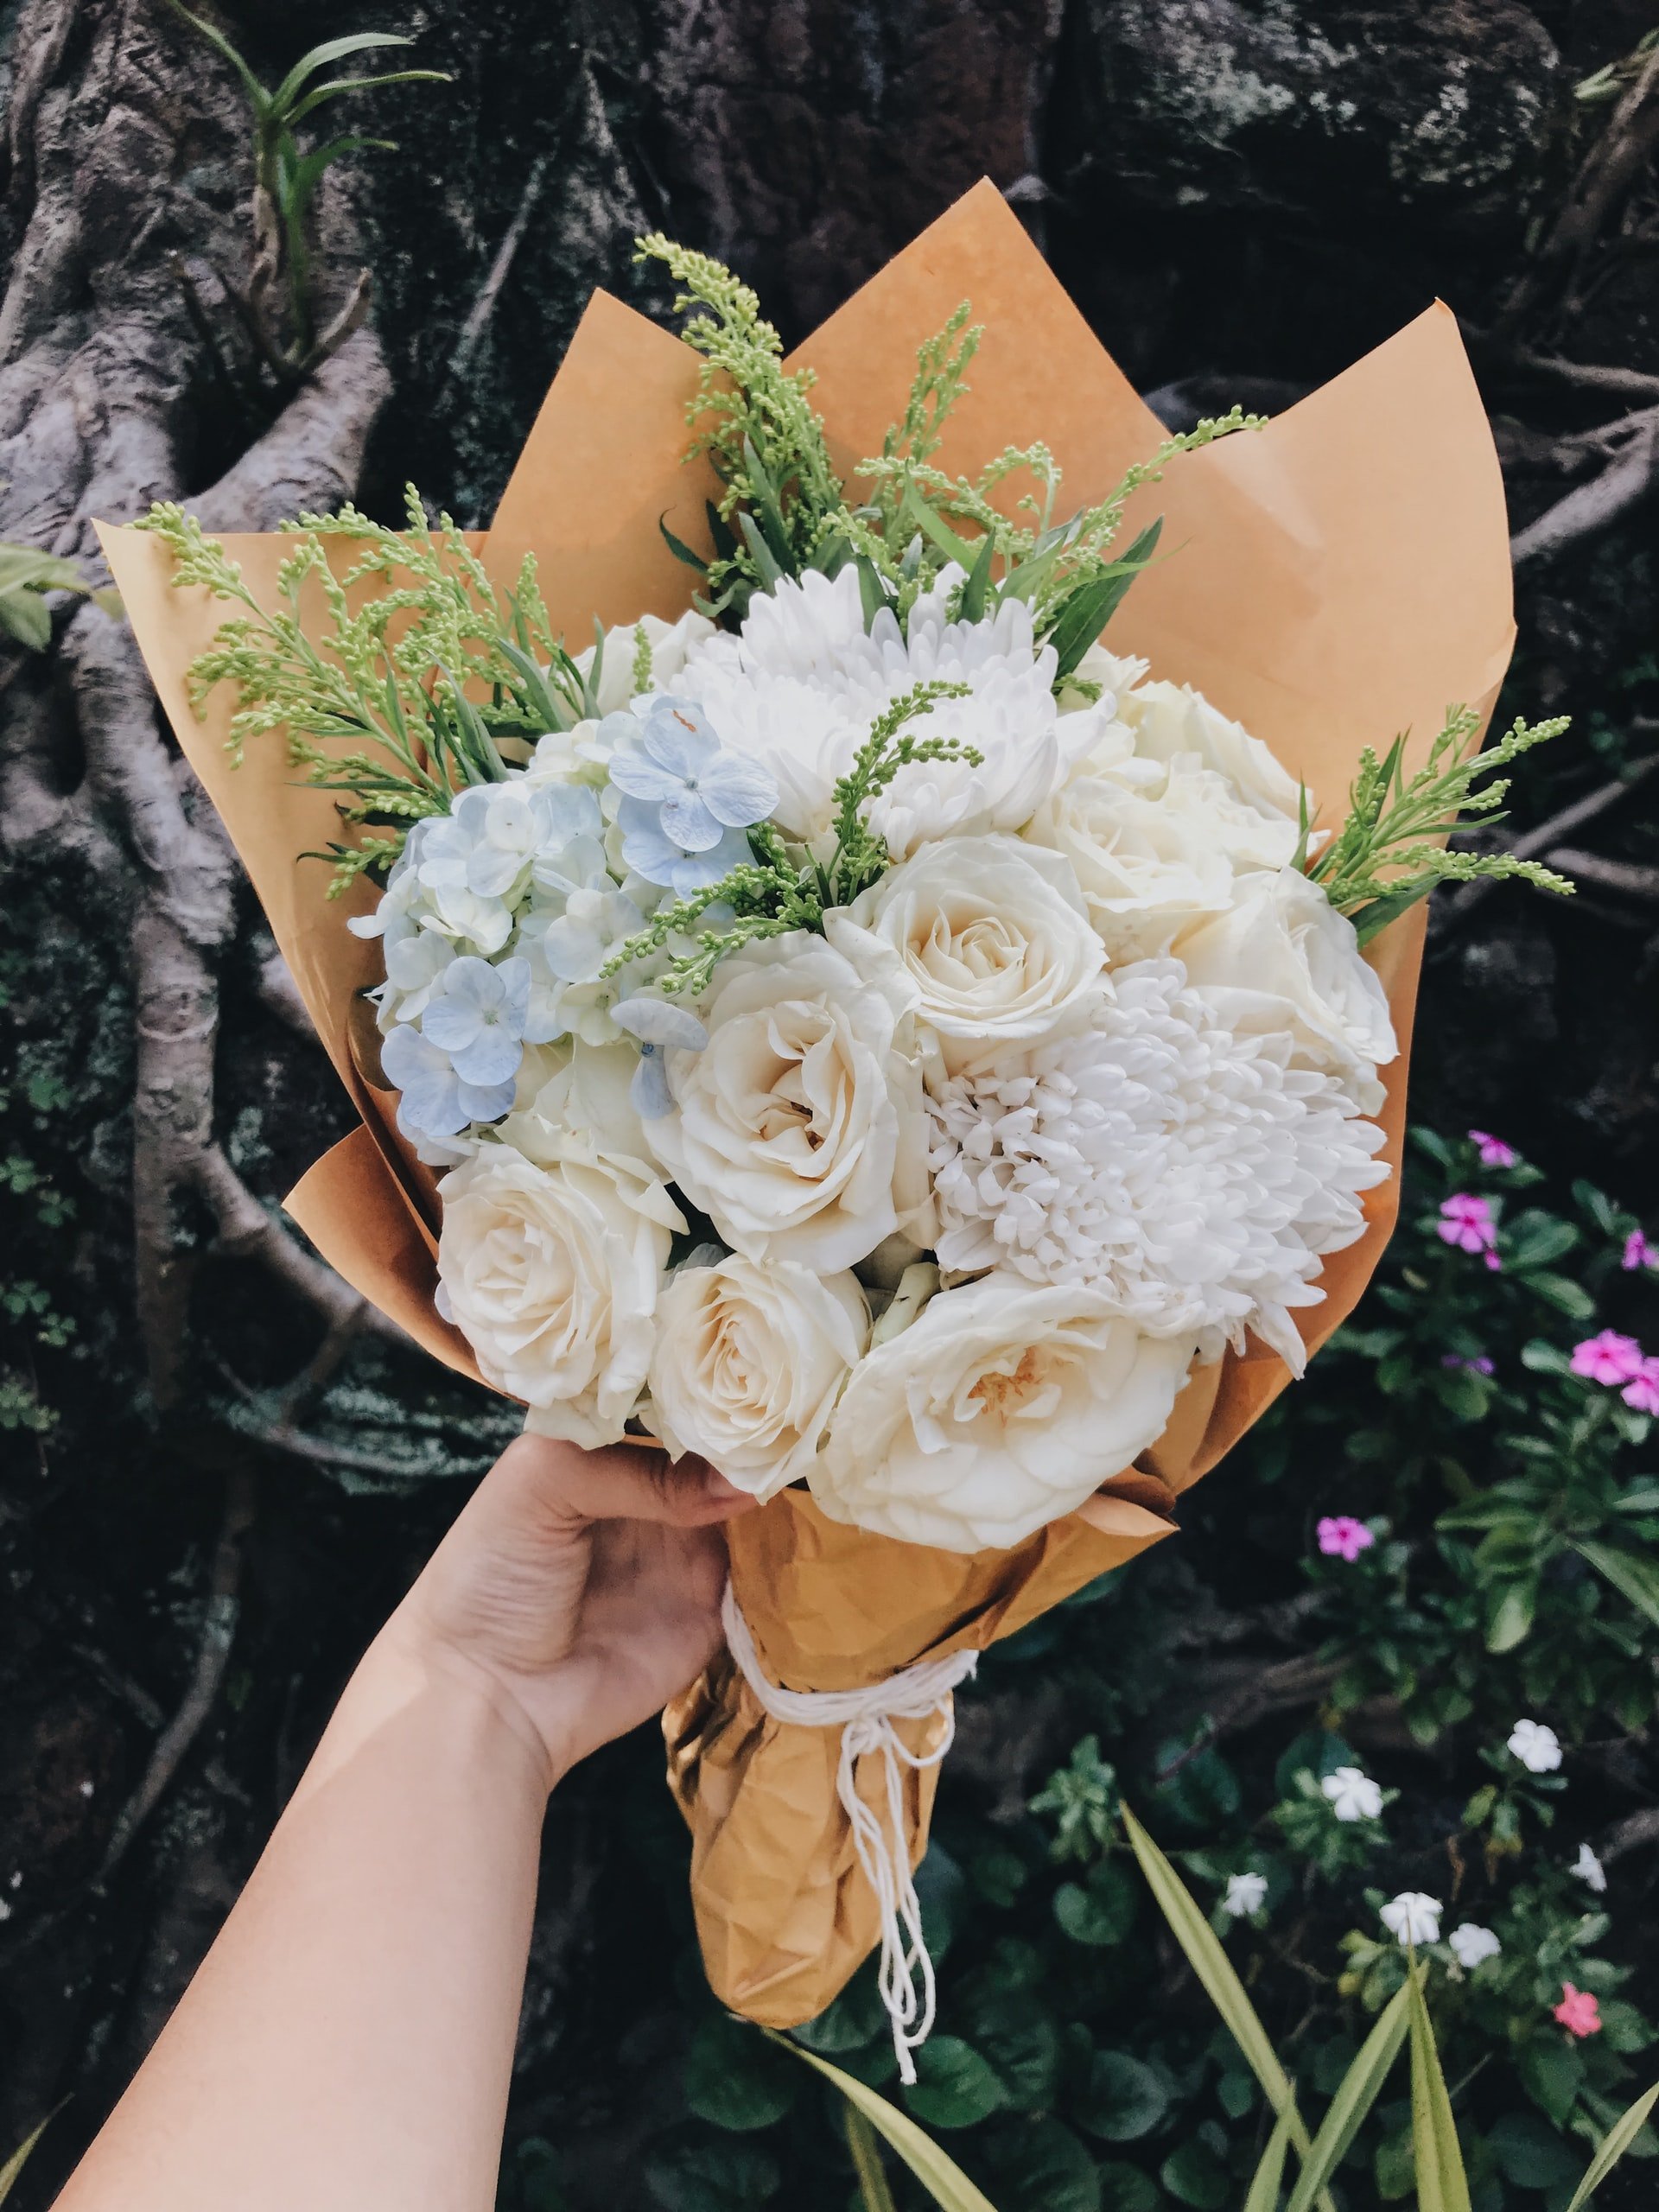 He brought her flowers every week and a card. | Source: Unsplash